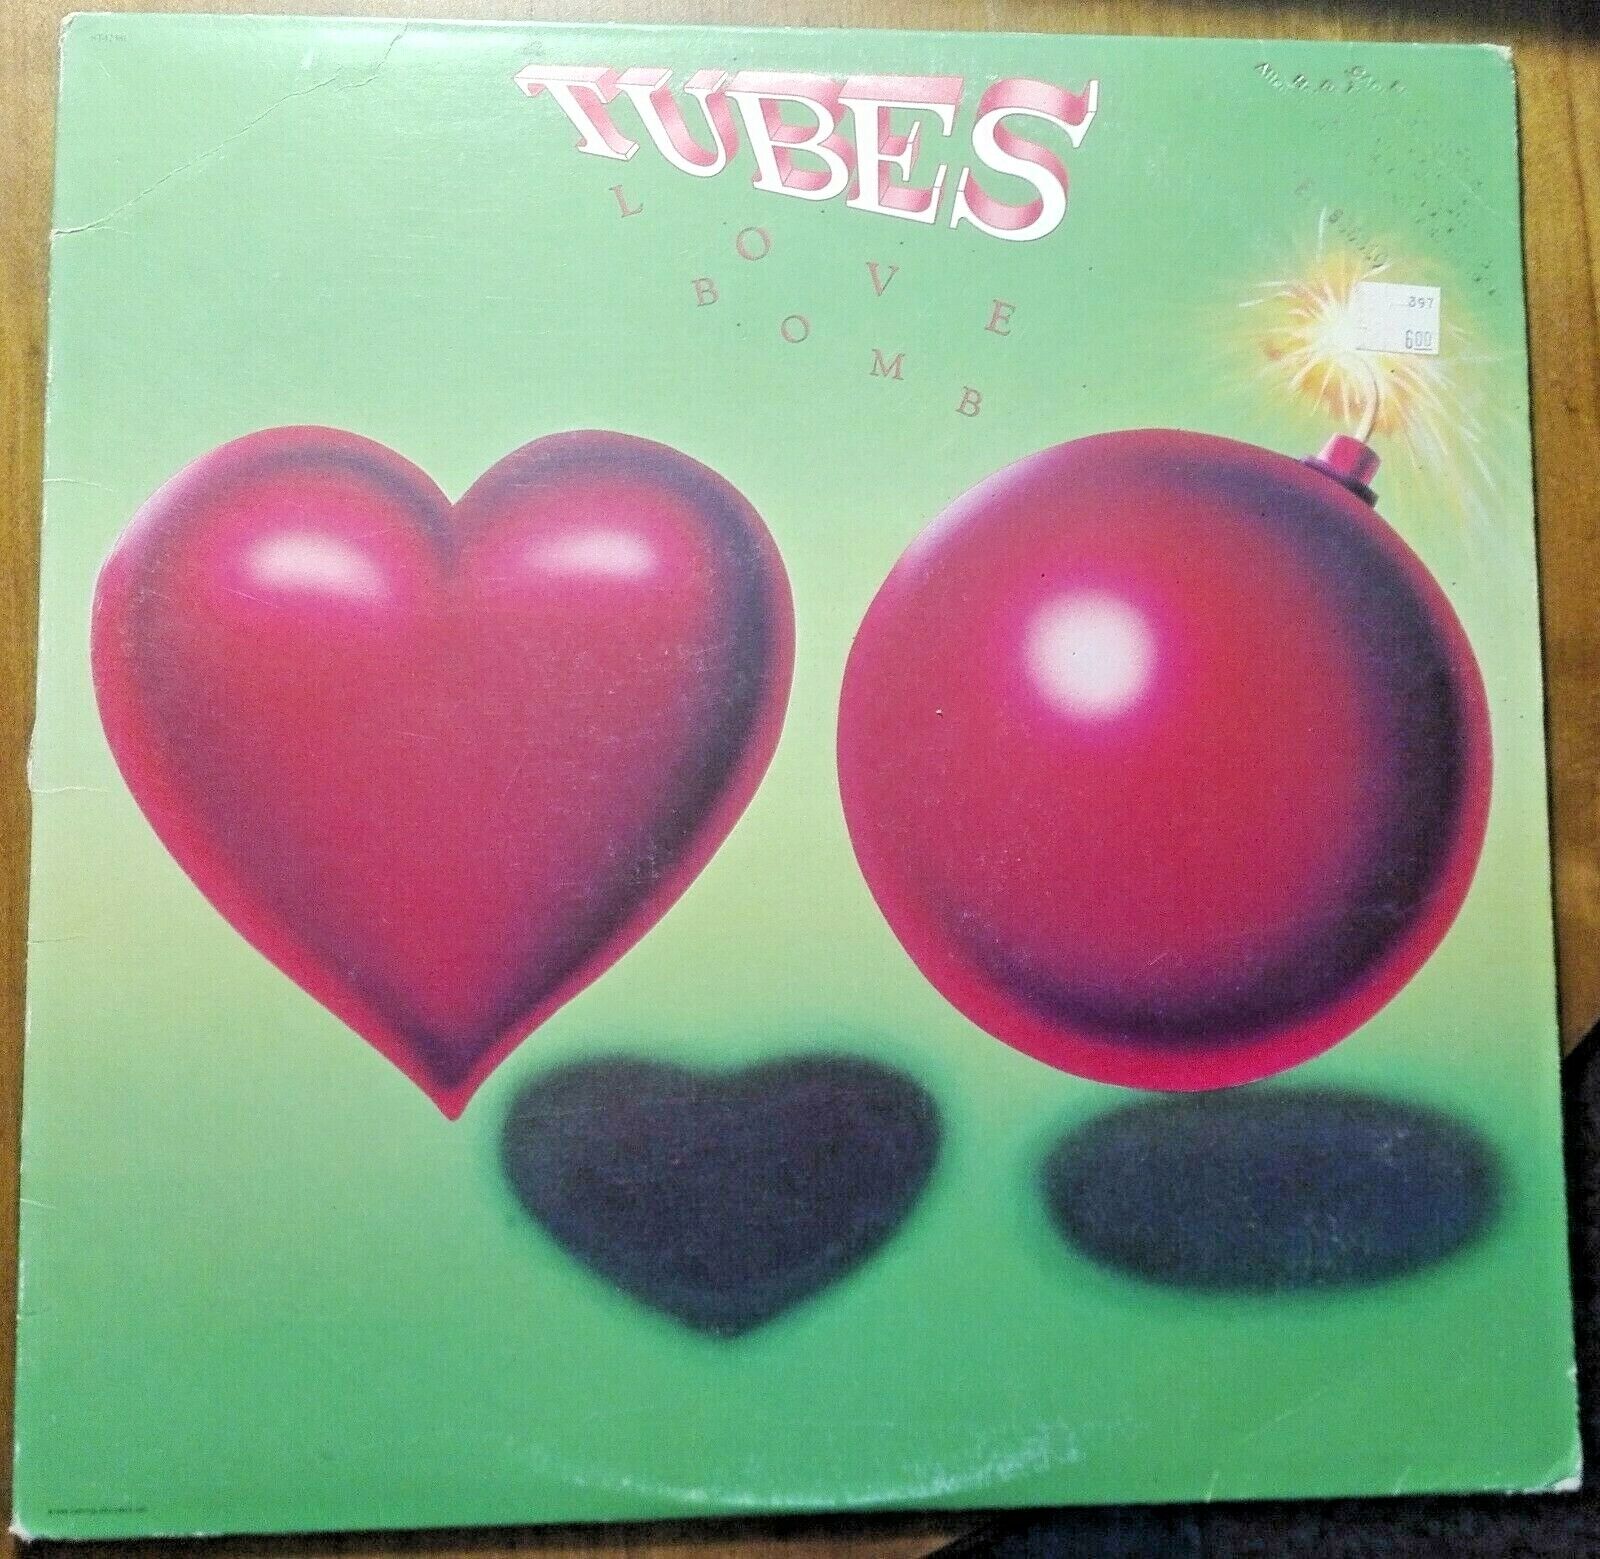 Tubes-Love Bomb-Gold Stamp Promo LP- SHIPPING DEAL BELOW